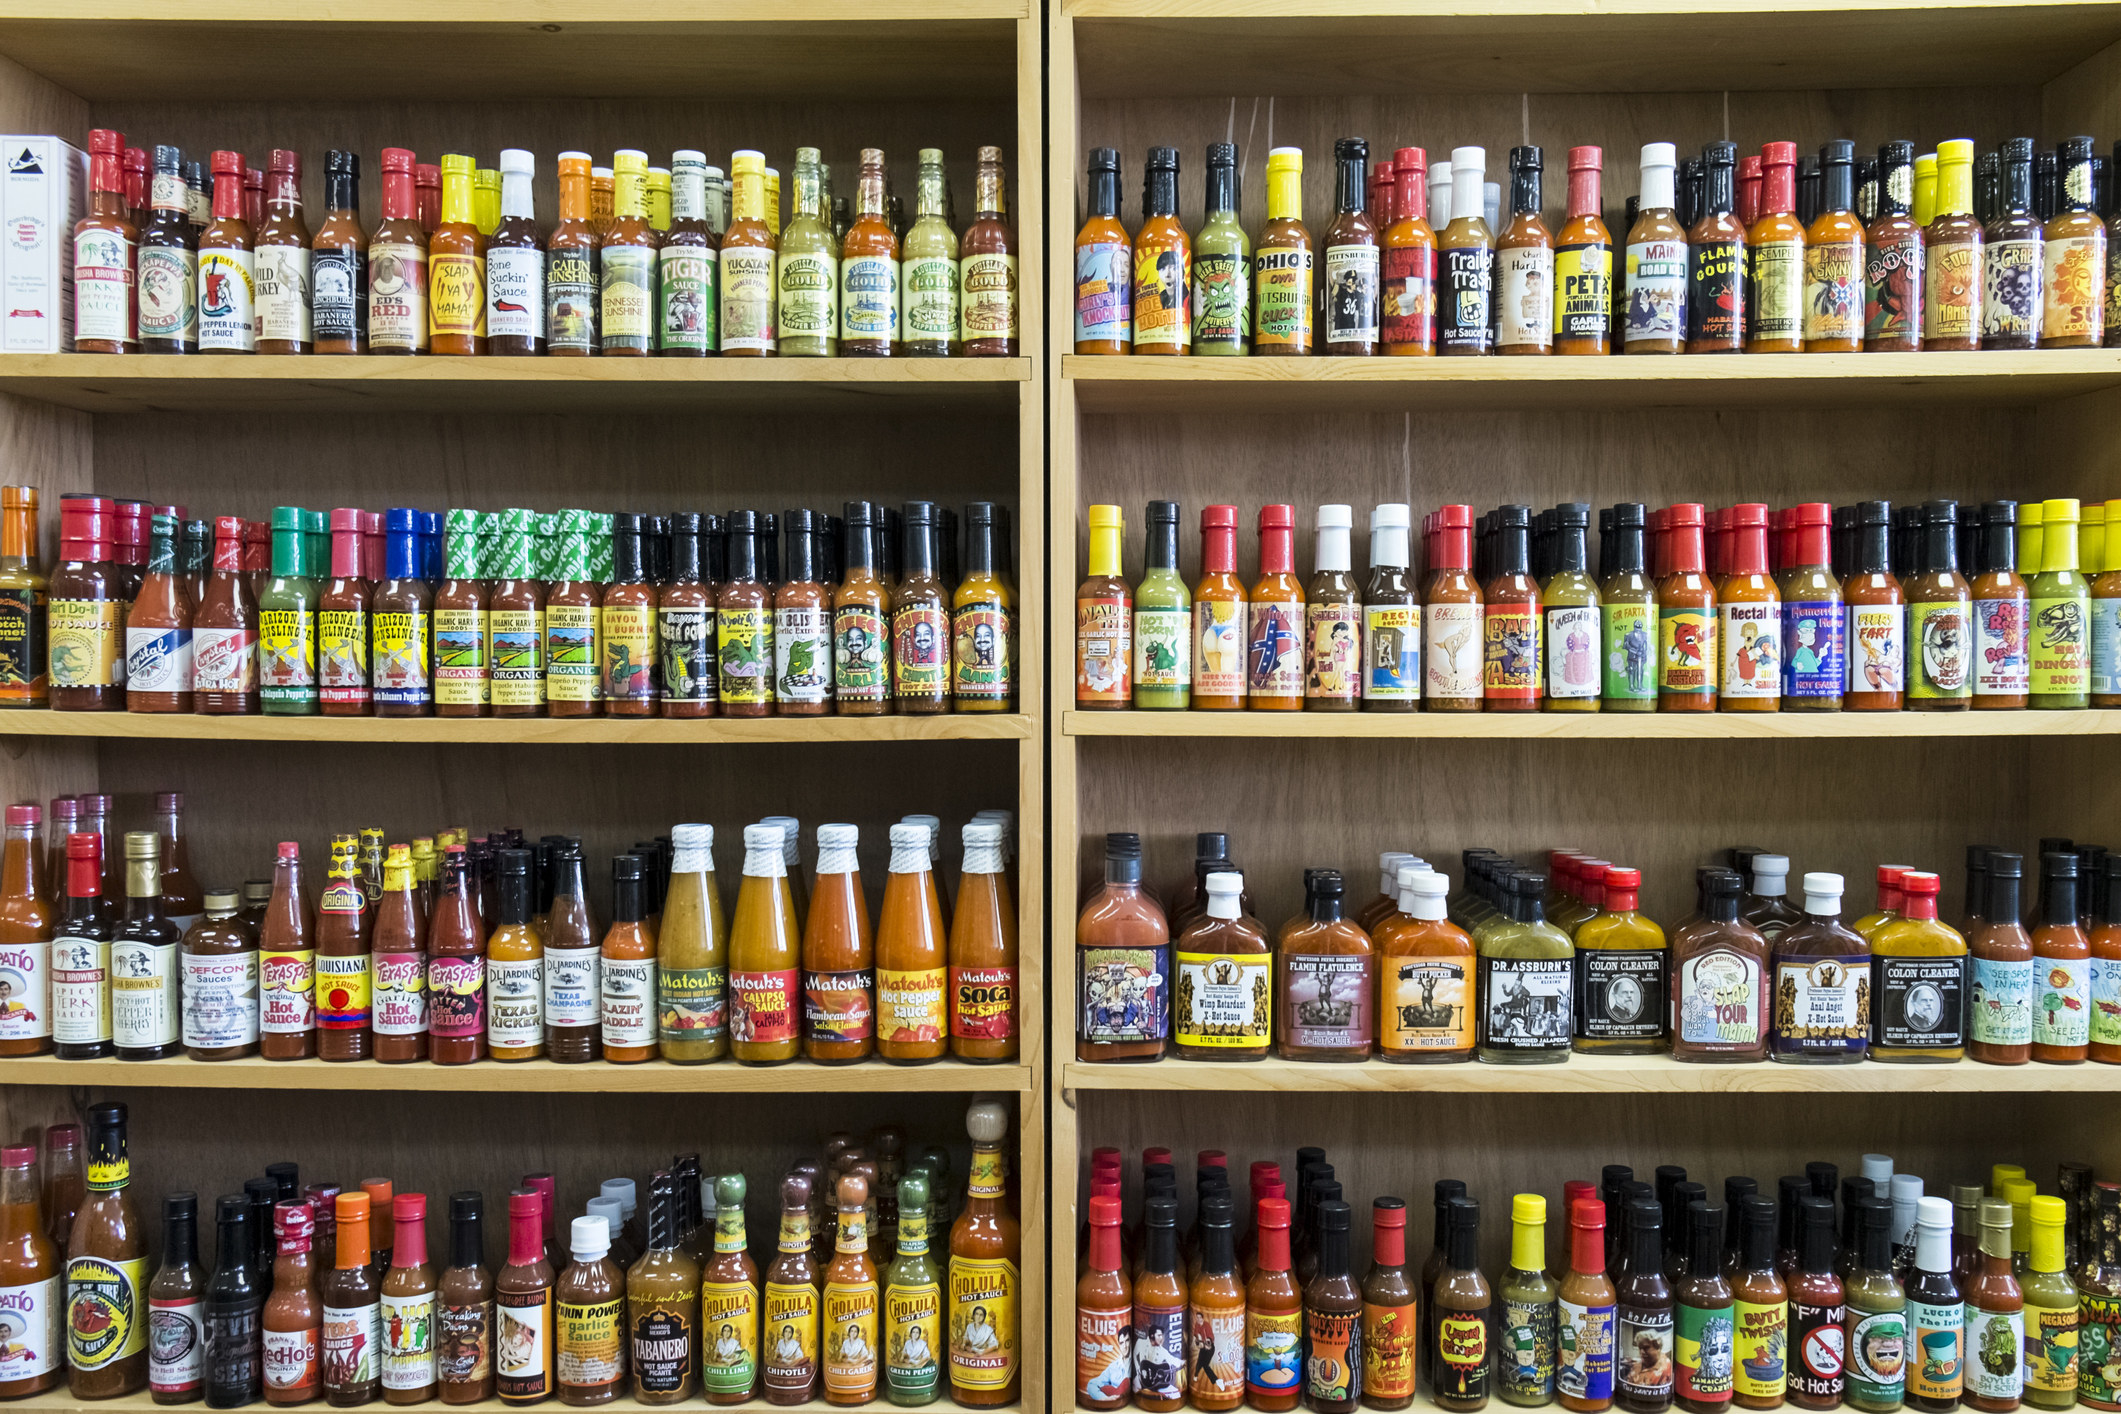 Shelves filled with many different hot sauces